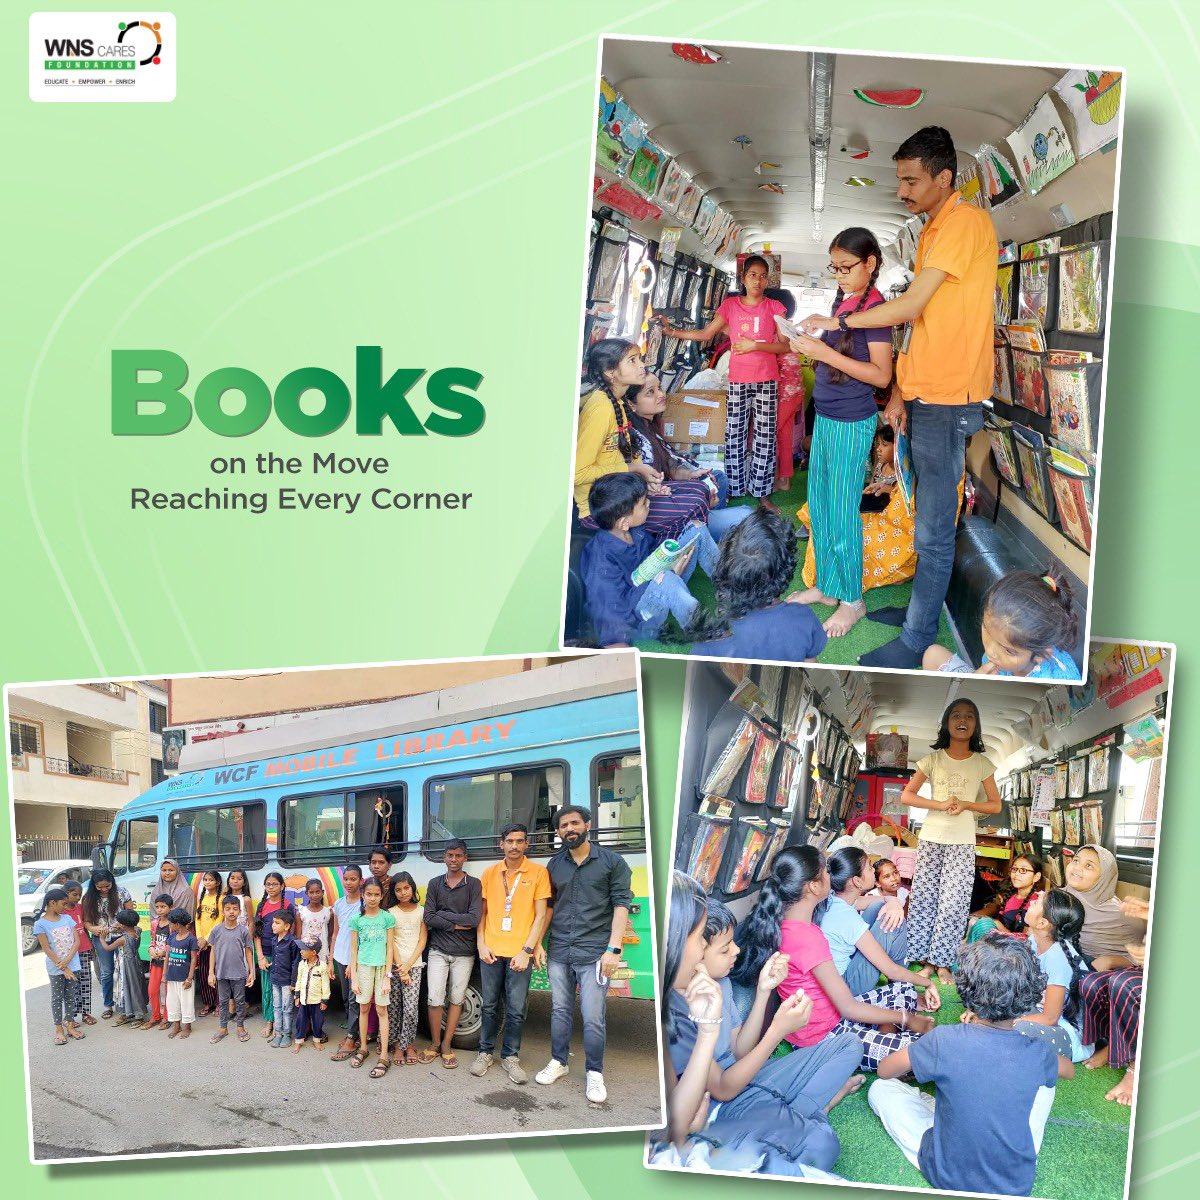 Hitting the road in Pune! #WCF Mobile Library brings the joy of reading to Thite Vasti, Kharadi. #MobileLibrary #LearnWithWCF #WCFGEMS